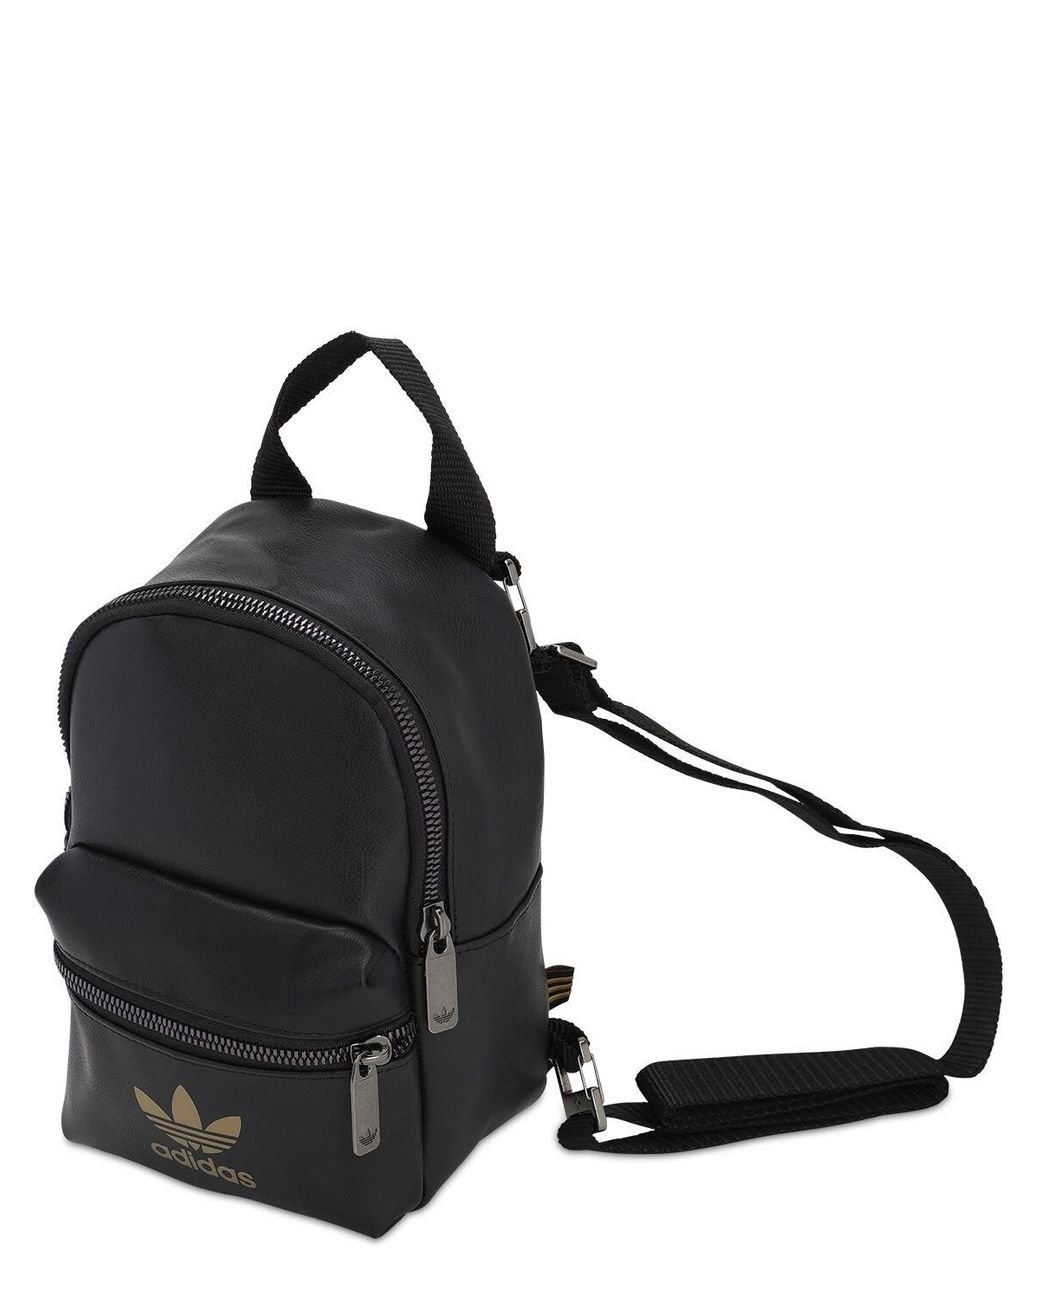 adidas originals mini backpack in white faux leather